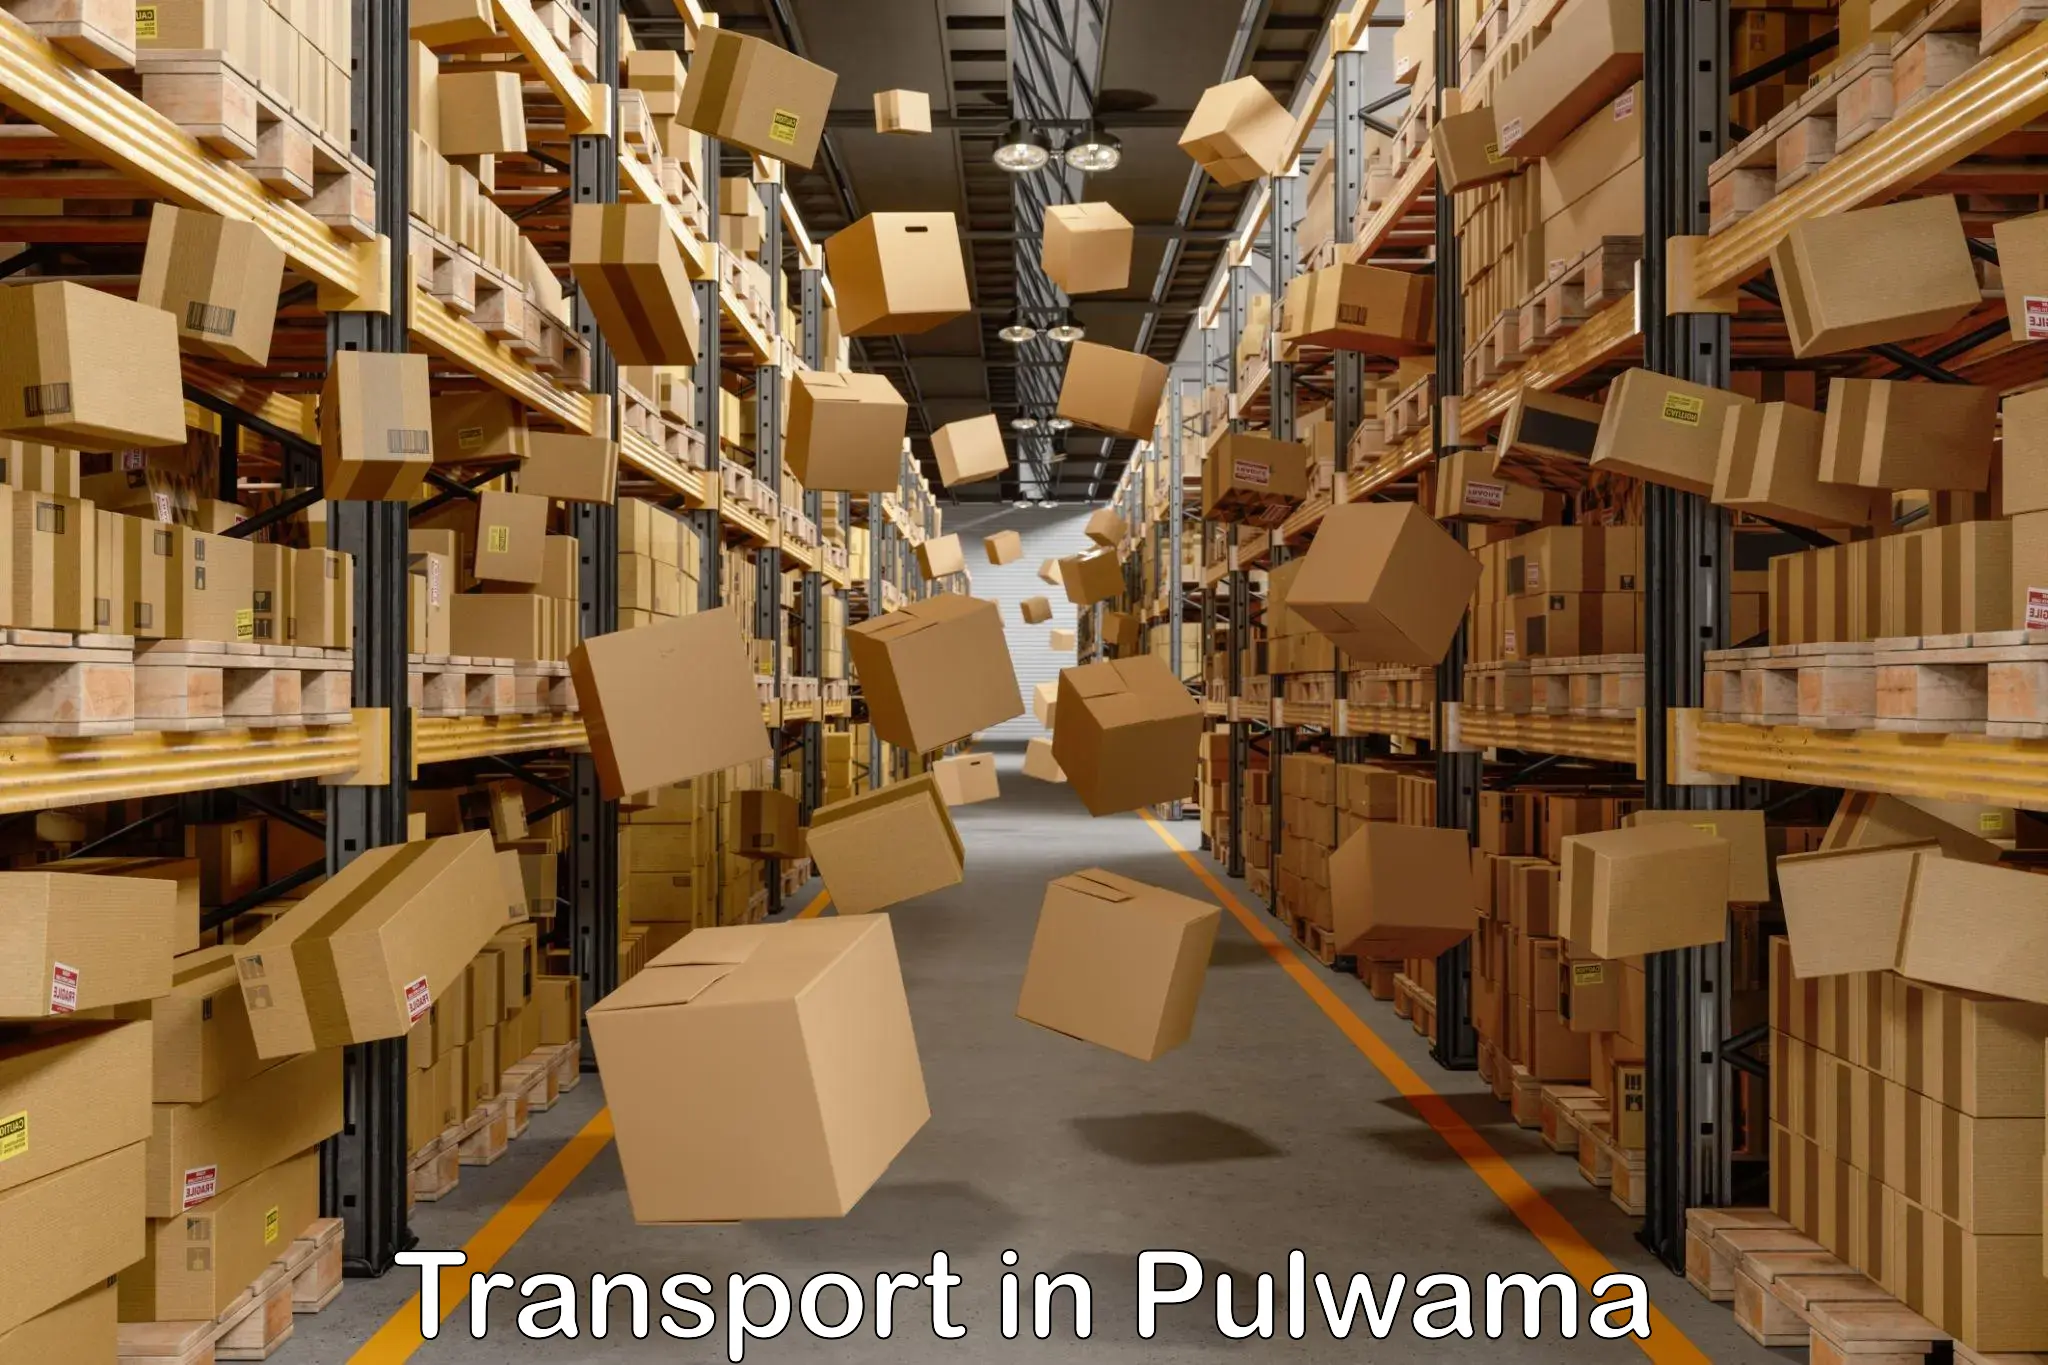 Luggage transport services in Pulwama